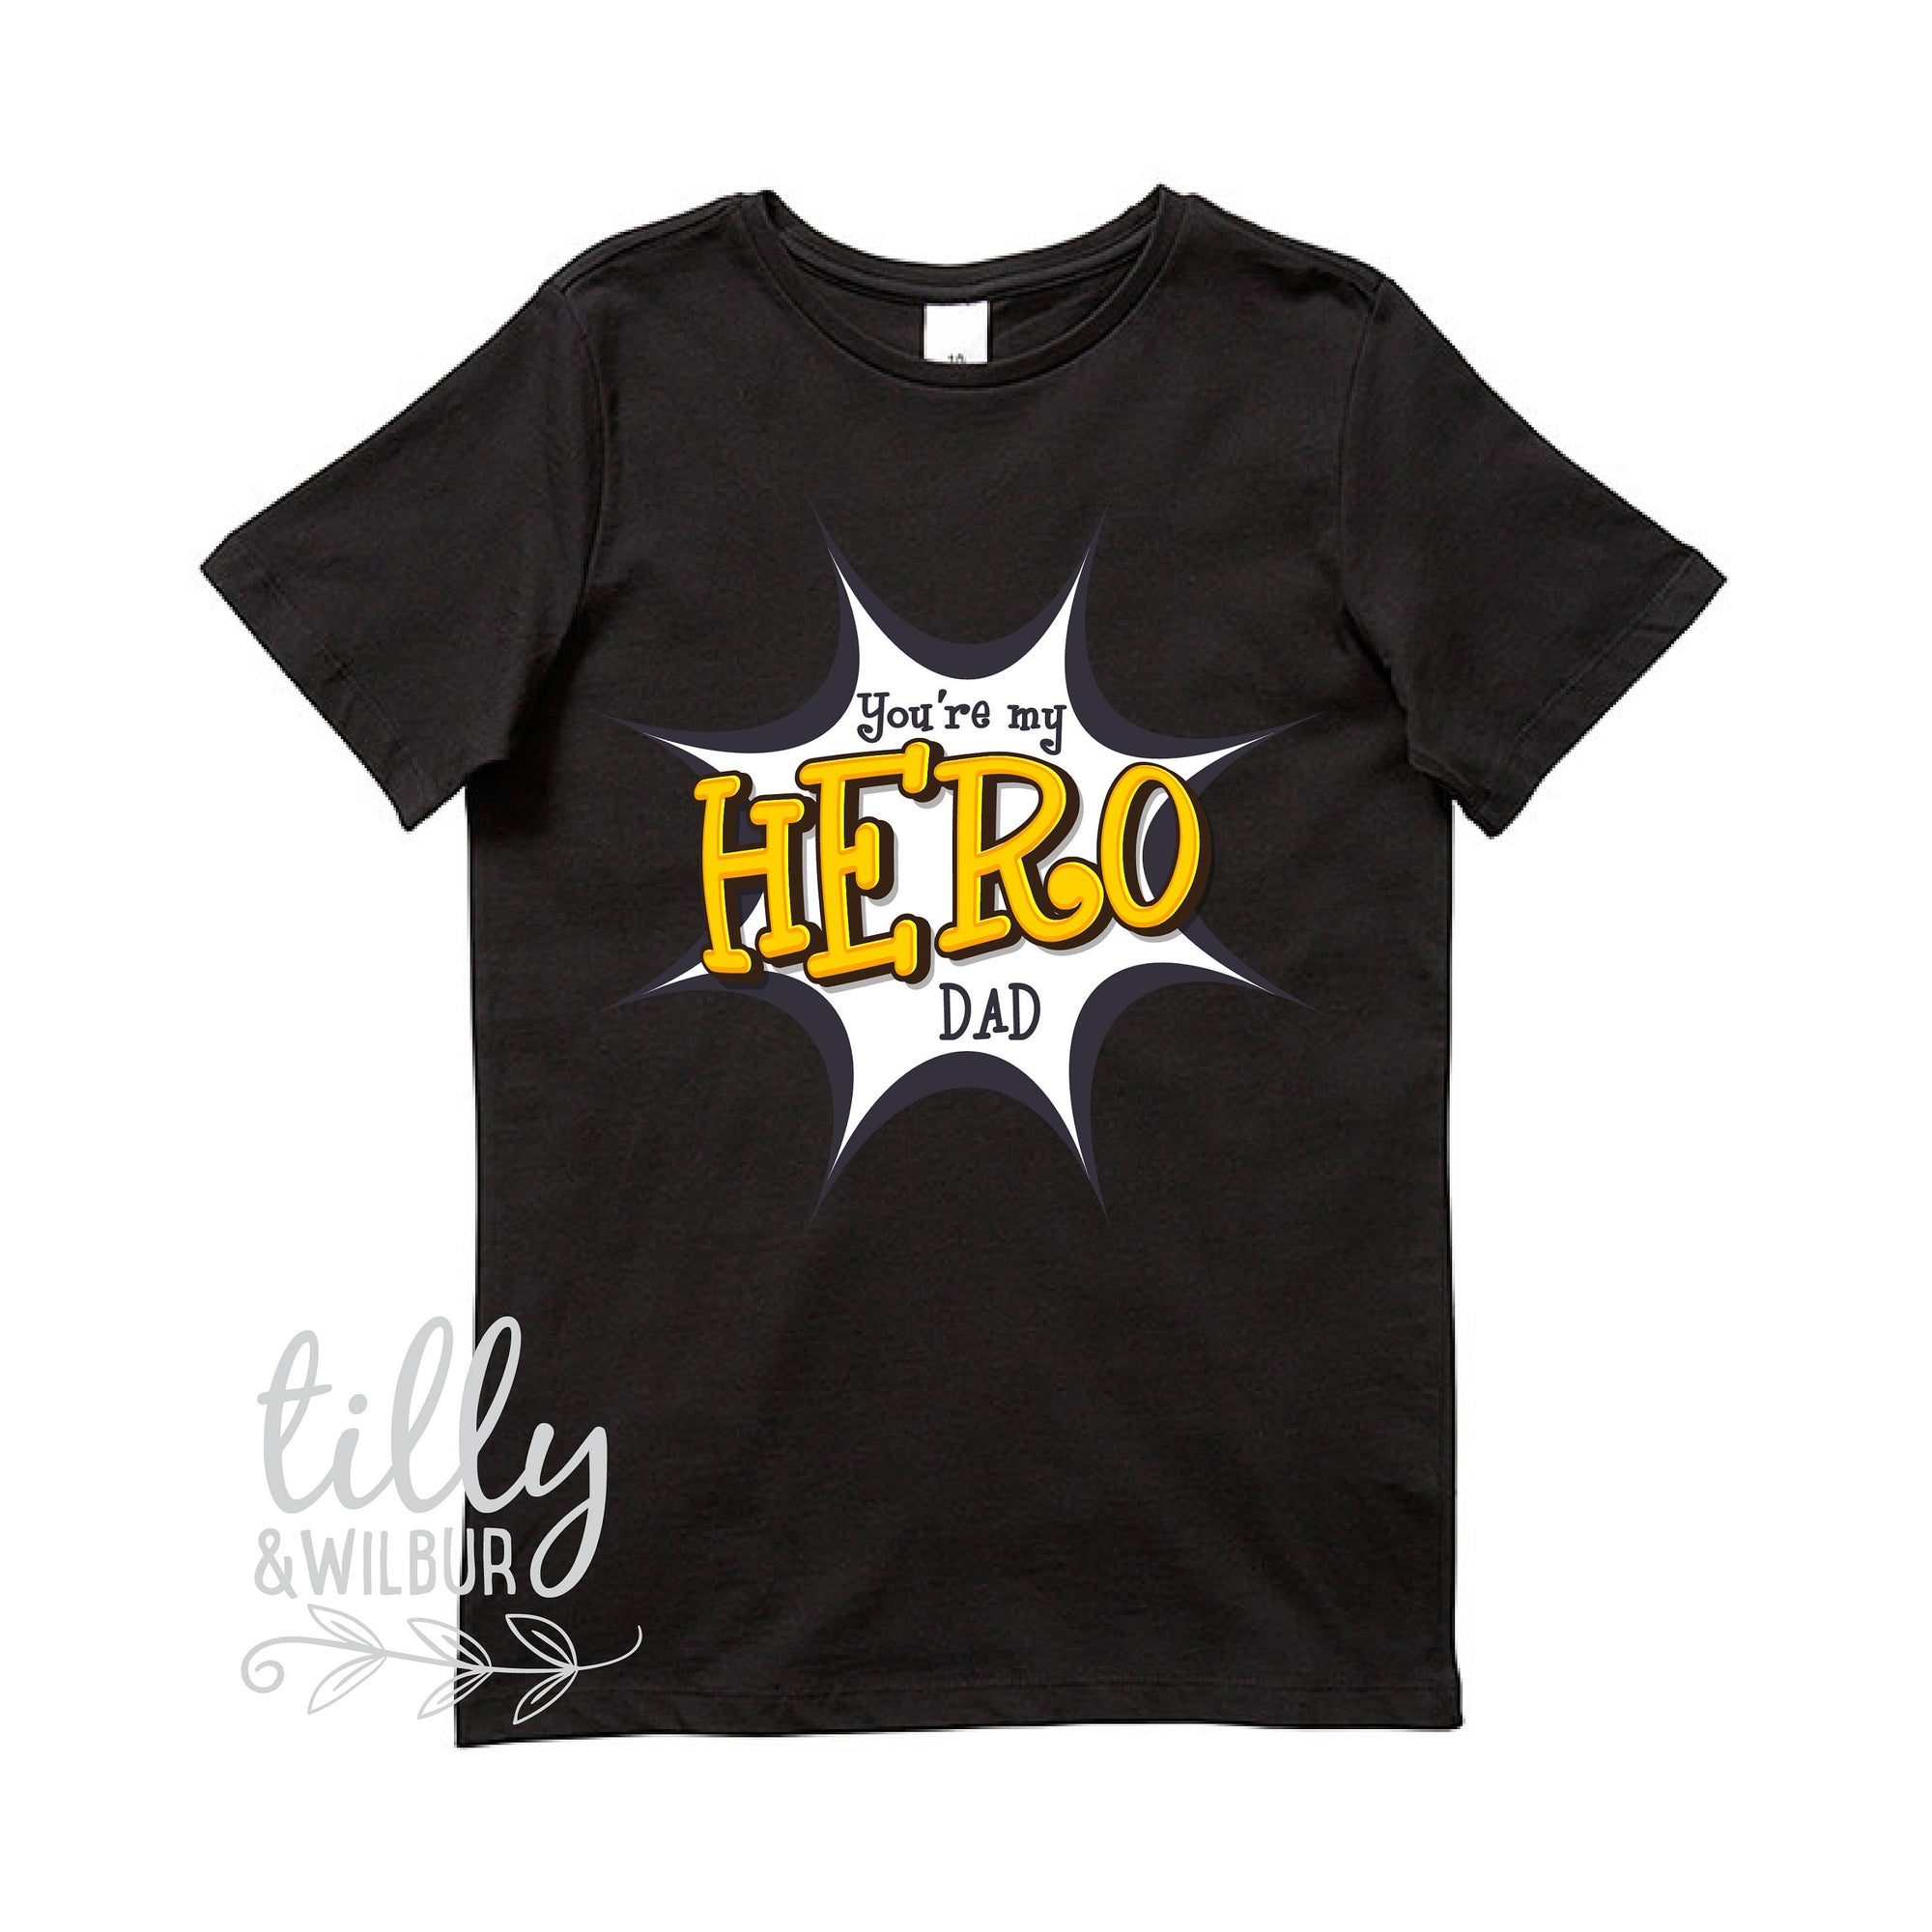 Father's Day T-Shirt For Boys, Father's Day Outfit, You're My Hero Dad, Daddy I Love You, Father's Day Shirt, Best Dad Ever, Superhero Dad